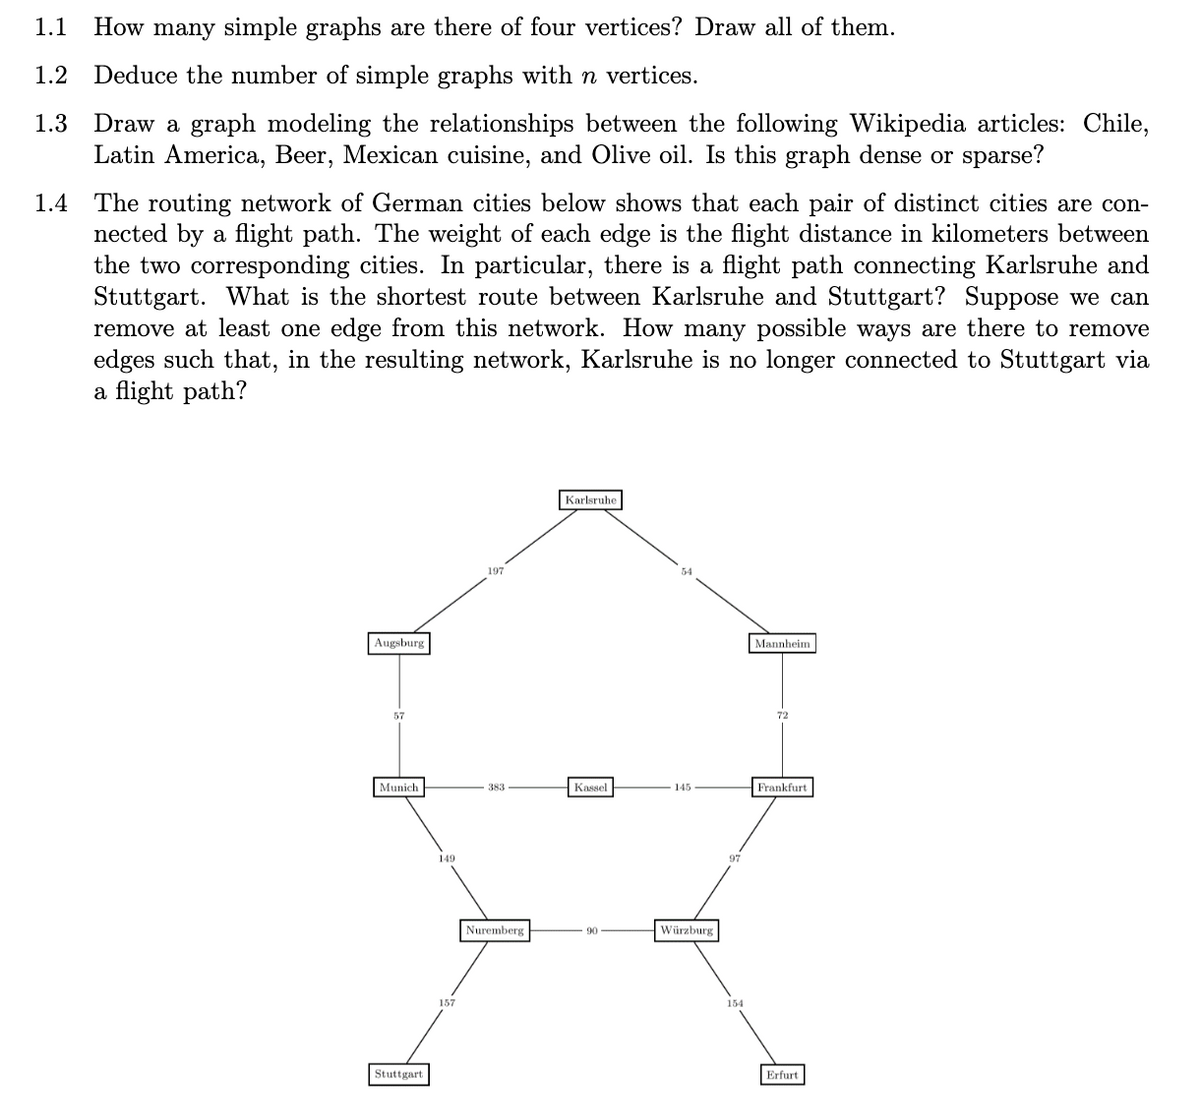 1.1
How many simple graphs are there of four vertices? Draw all of them.
1.2
Deduce the number of simple graphs with n vertices.
Draw a graph modeling the relationships between the following Wikipedia articles: Chile,
Latin America, Beer, Mexican cuisine, and Olive oil. Is this graph dense or sparse?
1.3
1.4 The routing network of German cities below shows that each pair of distinct cities are con-
nected by a flight path. The weight of each edge is the flight distance in kilometers between
the two corresponding cities. In particular, there is a flight path connecting Karlsruhe and
Stuttgart. What is the shortest route between Karlsruhe and Stuttgart? Suppose we can
remove at least one edge from this network. How many possible ways are there to remove
edges such that, in the resulting network, Karlsruhe is no longer connected to Stuttgart via
a flight path?
Karlsruhe
197
Augsburg
Mannheim
57
72
Munich
383
Kassel
145
Frankfurt
149
97
Nuremberg
90
Würzburg
157
154
Stuttgart
Erfurt
